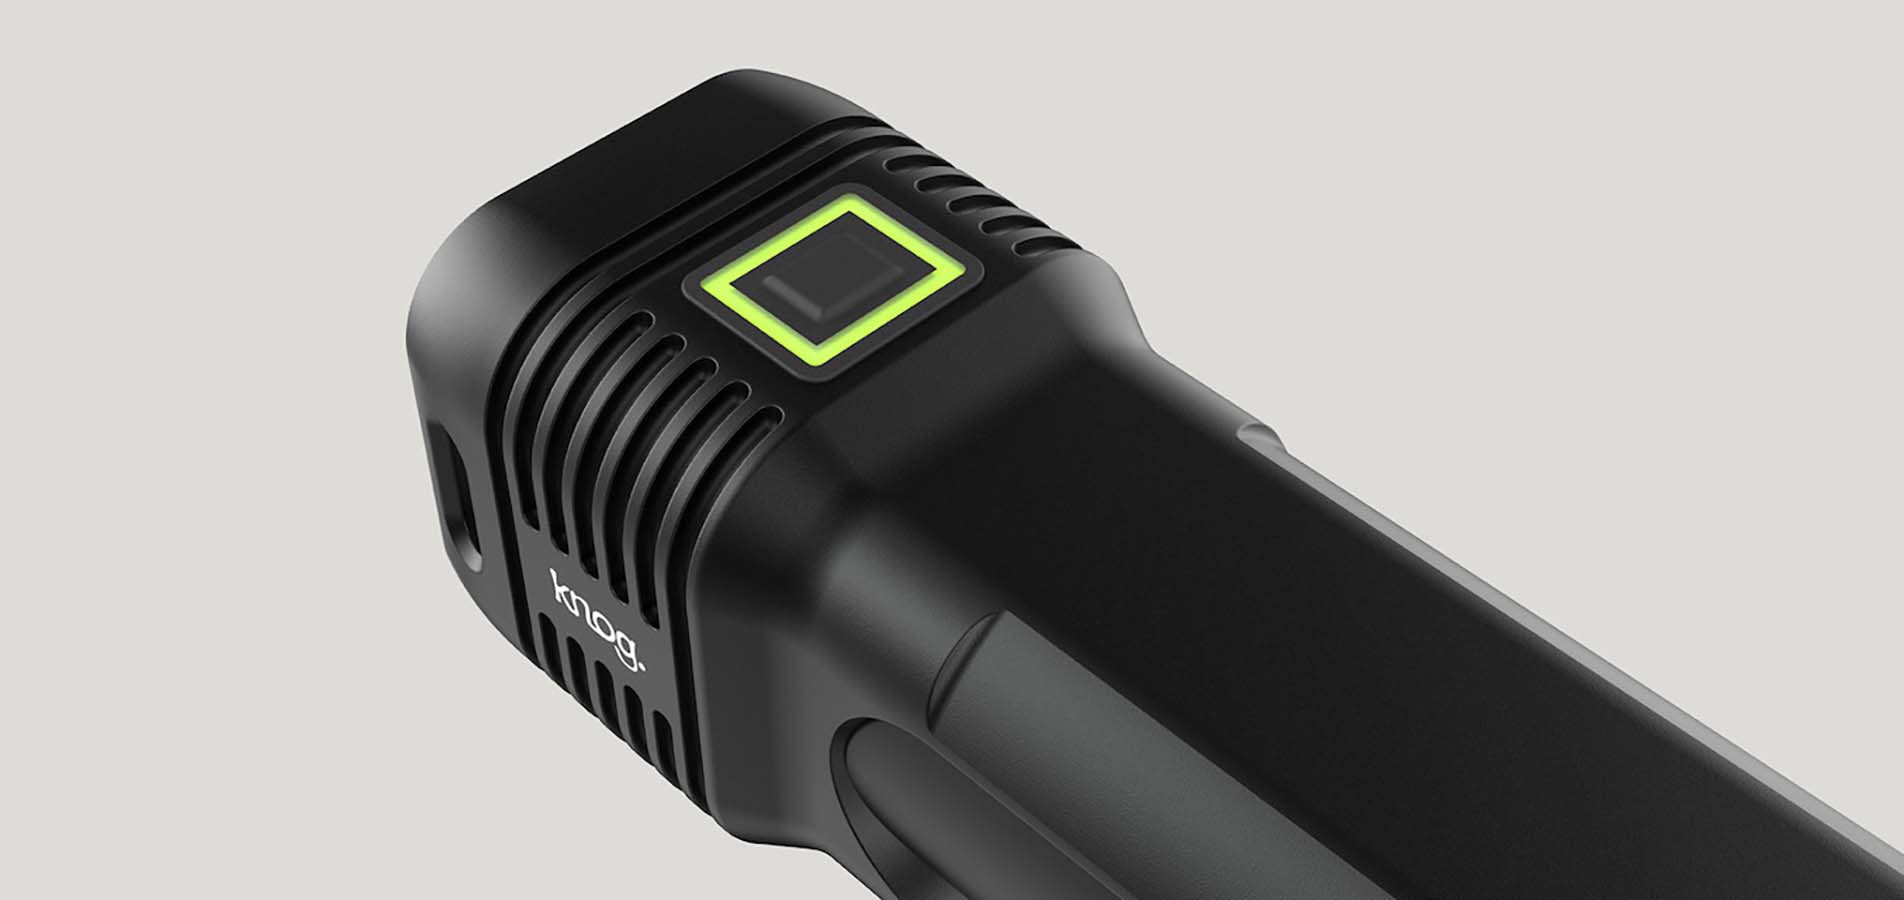 Blinder 1300 Front Bike Light, with it's smart button